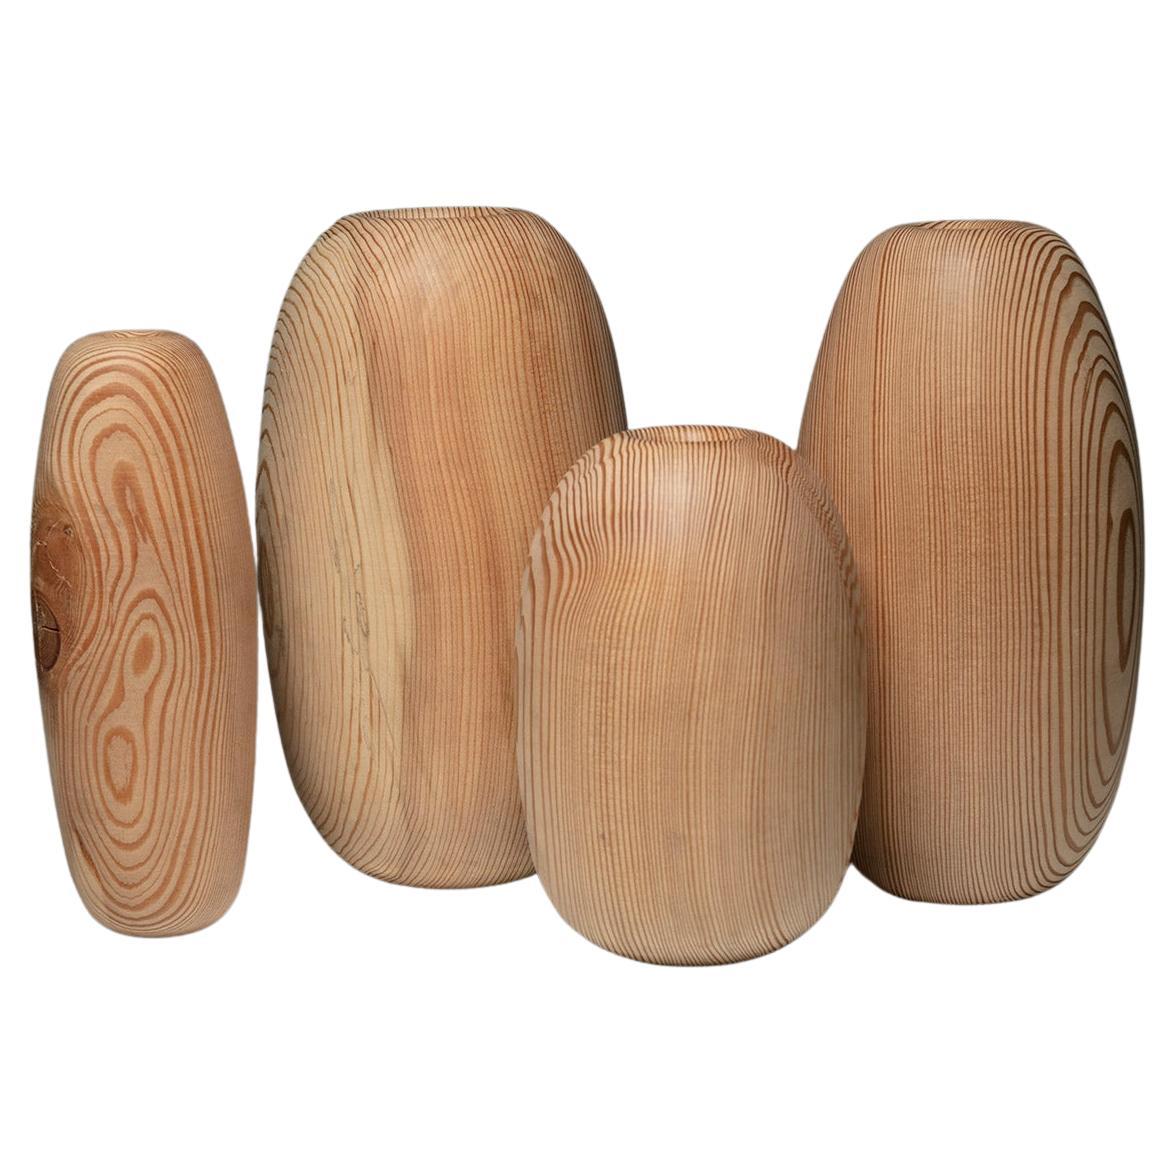 Set of Four Organic Shaped Solid Larch Wood Vases, Italy, 1980s